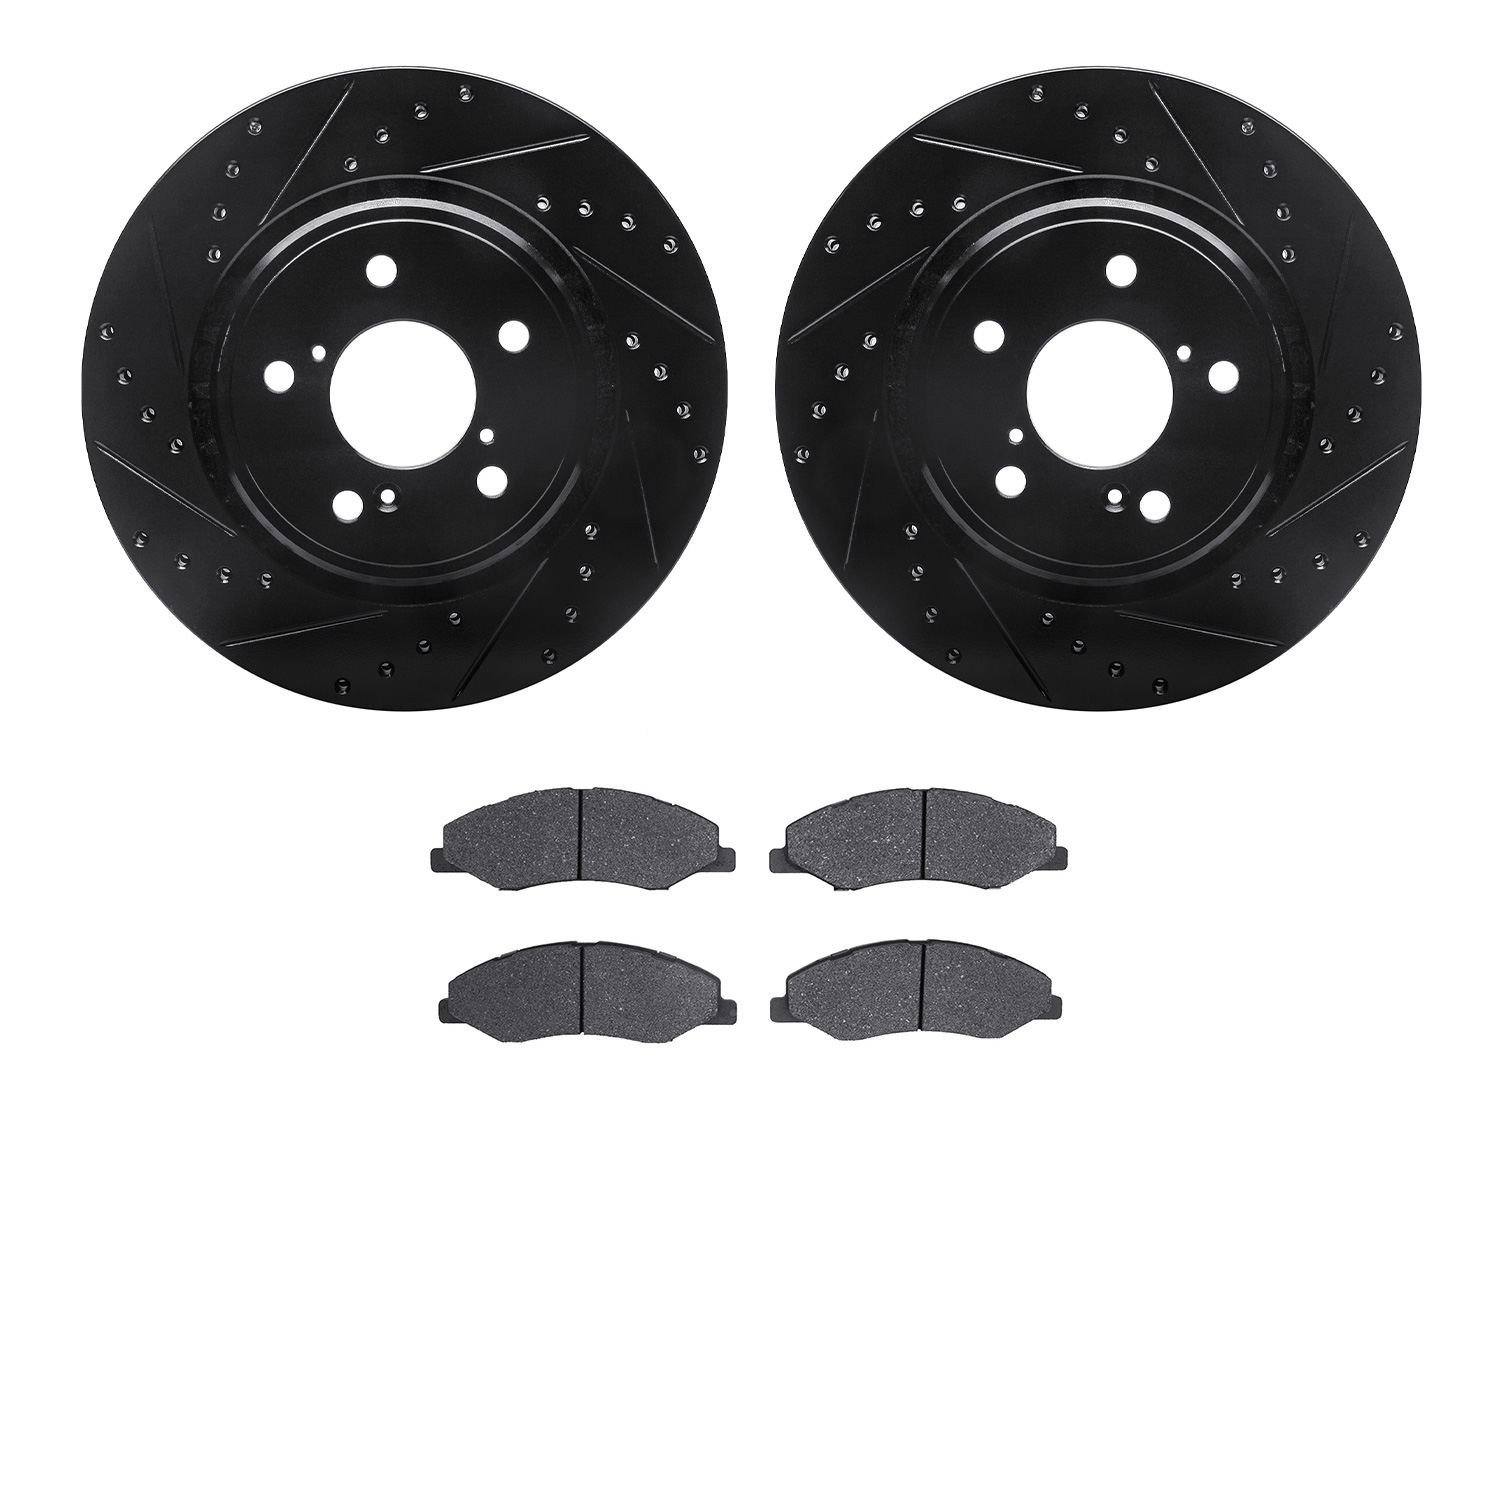 8302-59113 Drilled/Slotted Brake Rotors with 3000-Series Ceramic Brake Pads Kit [Black], Fits Select Acura/Honda, Position: Fron